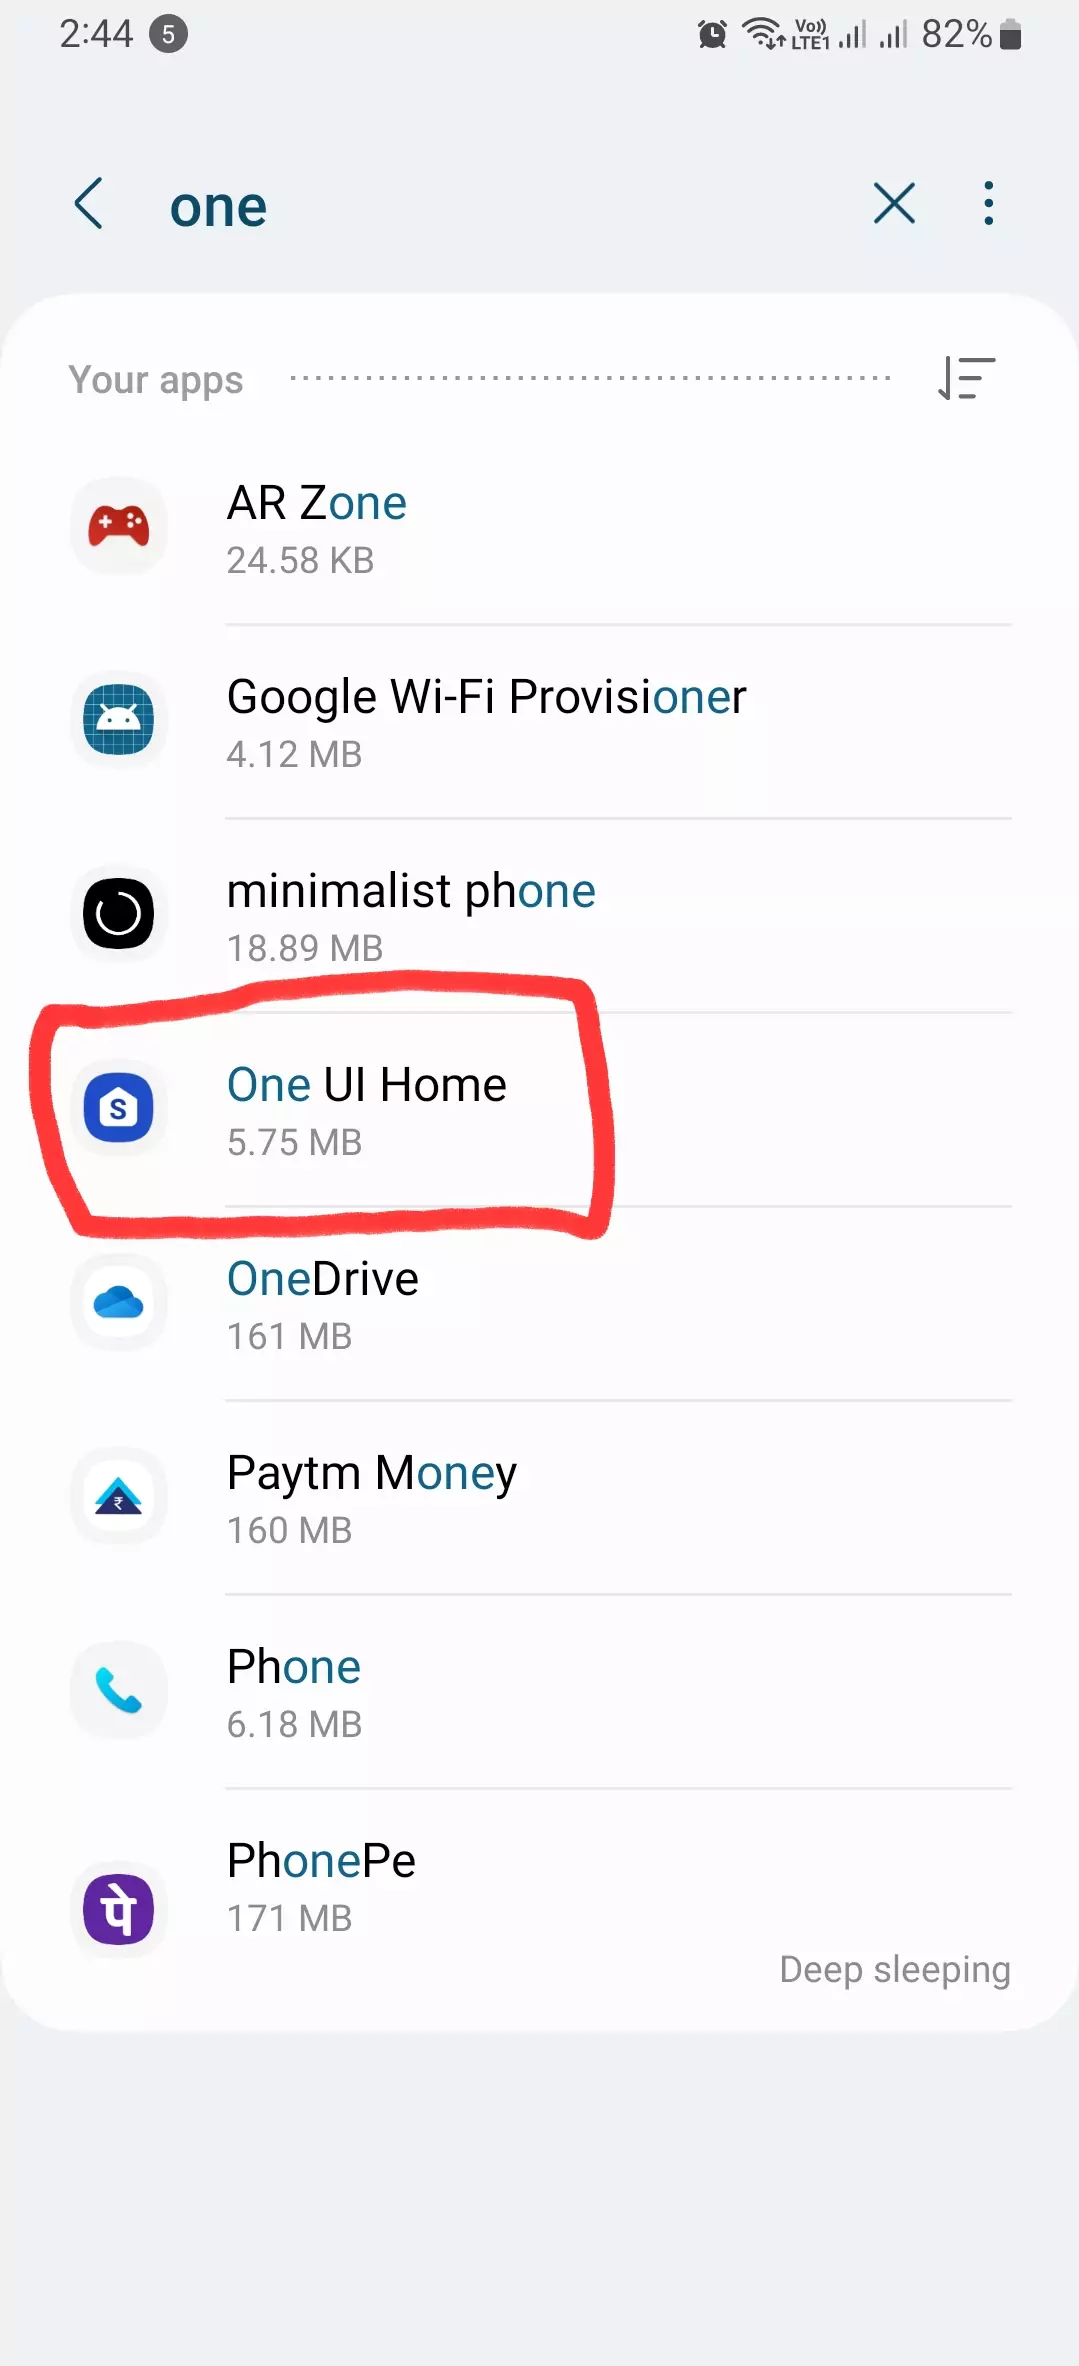 one ui app highlighted from app's info